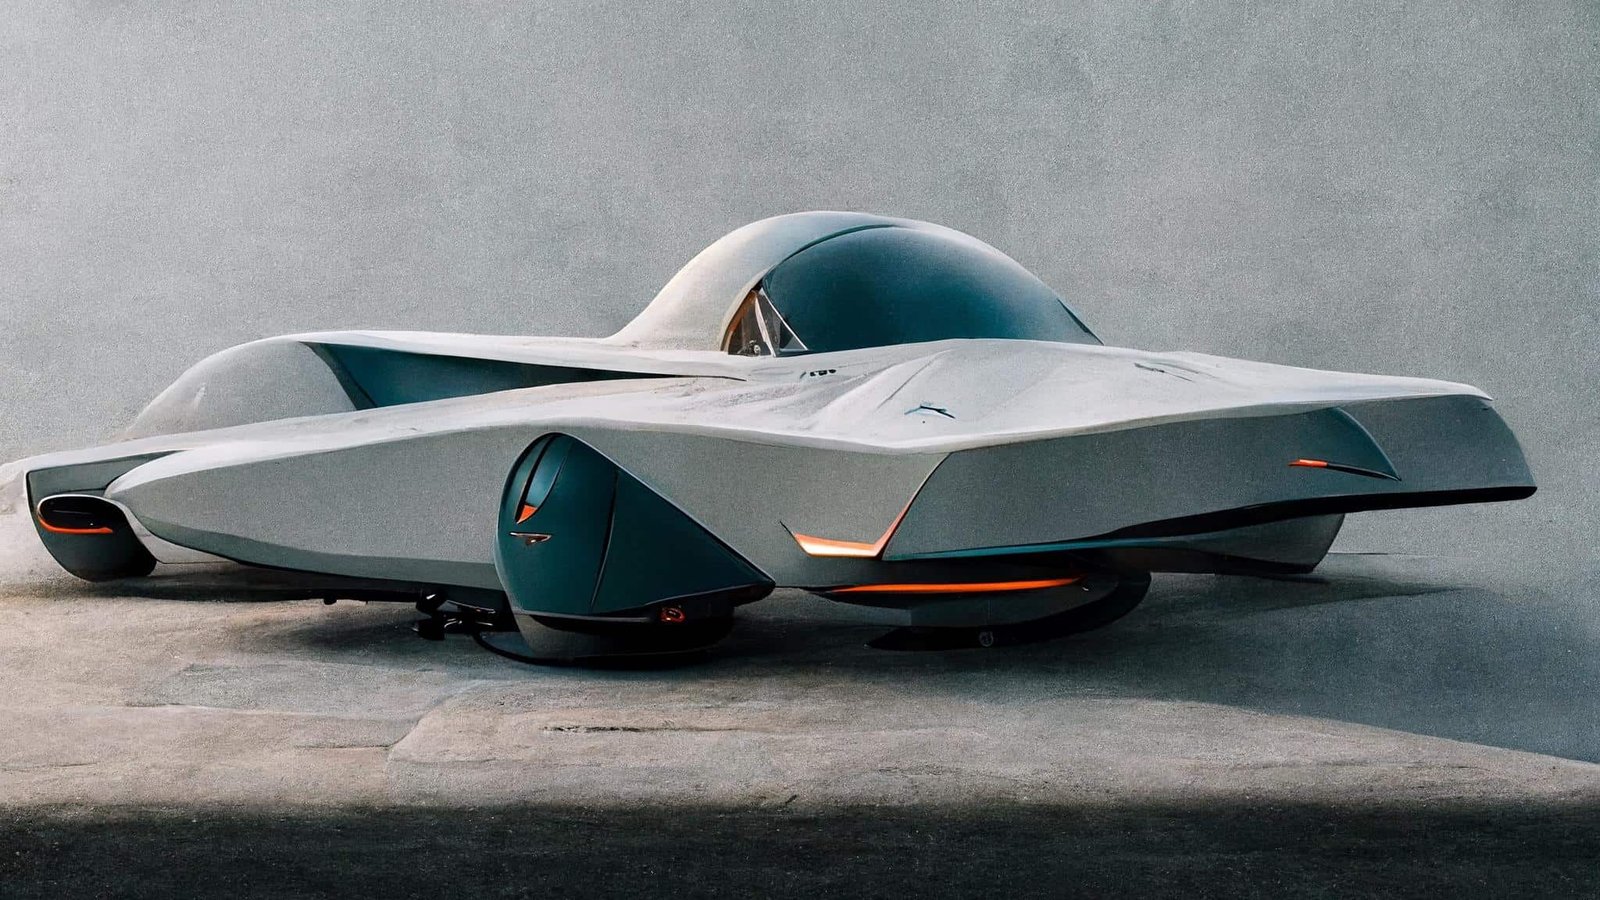 venema_A_future_inspired_flying_car_in_front_of_a_concrete_wall_5ca2022a-872c-44f2-9e26-0d7a5aa135a0